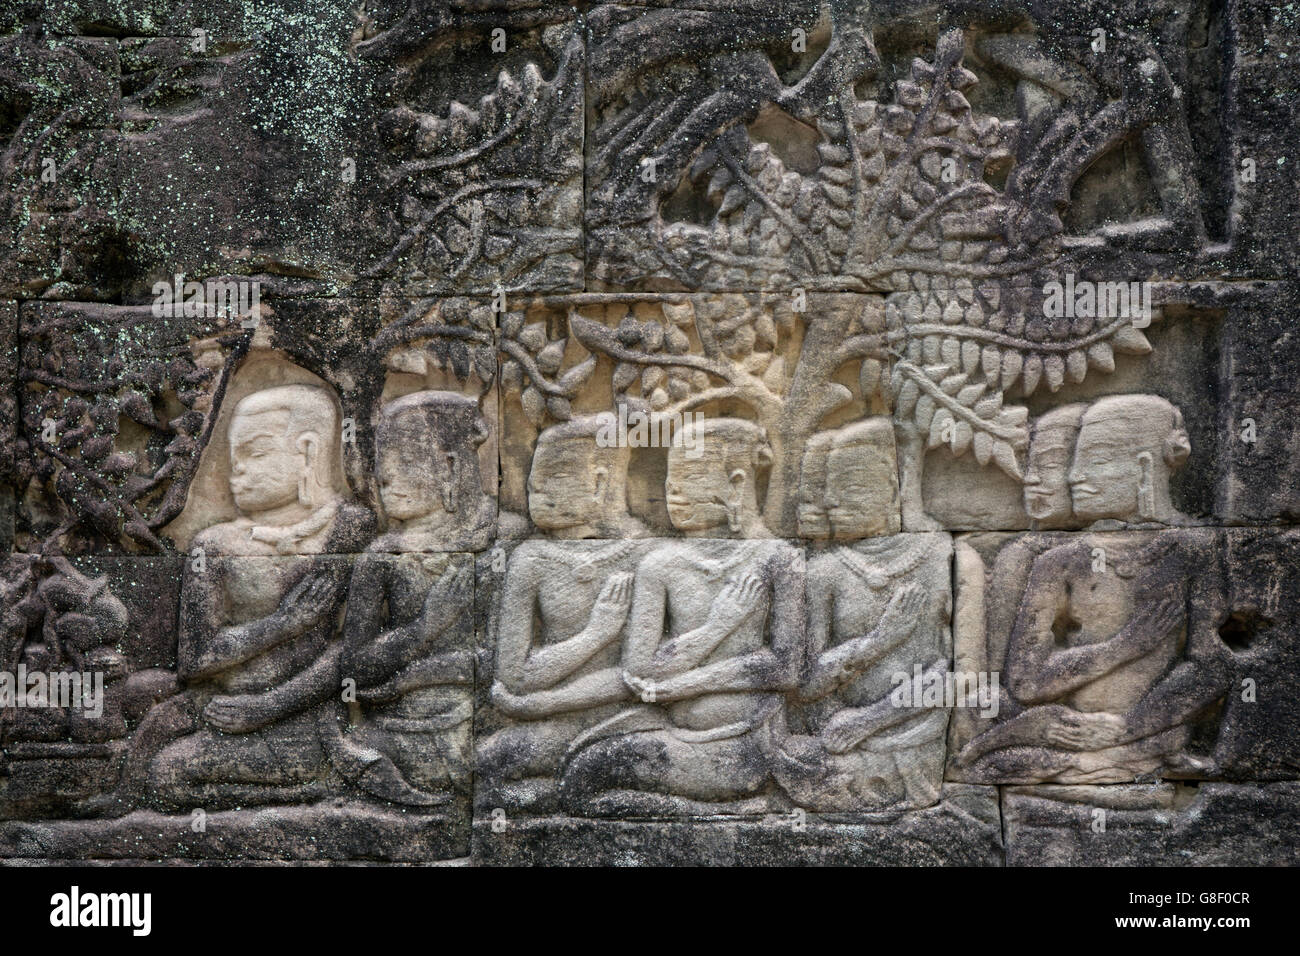 Mahayana Buddhist carvings showing arhats / boddhisattvas - on the side of the 12th or 13th Century Bayon temple, Angkor Thom, Cambodia Stock Photo